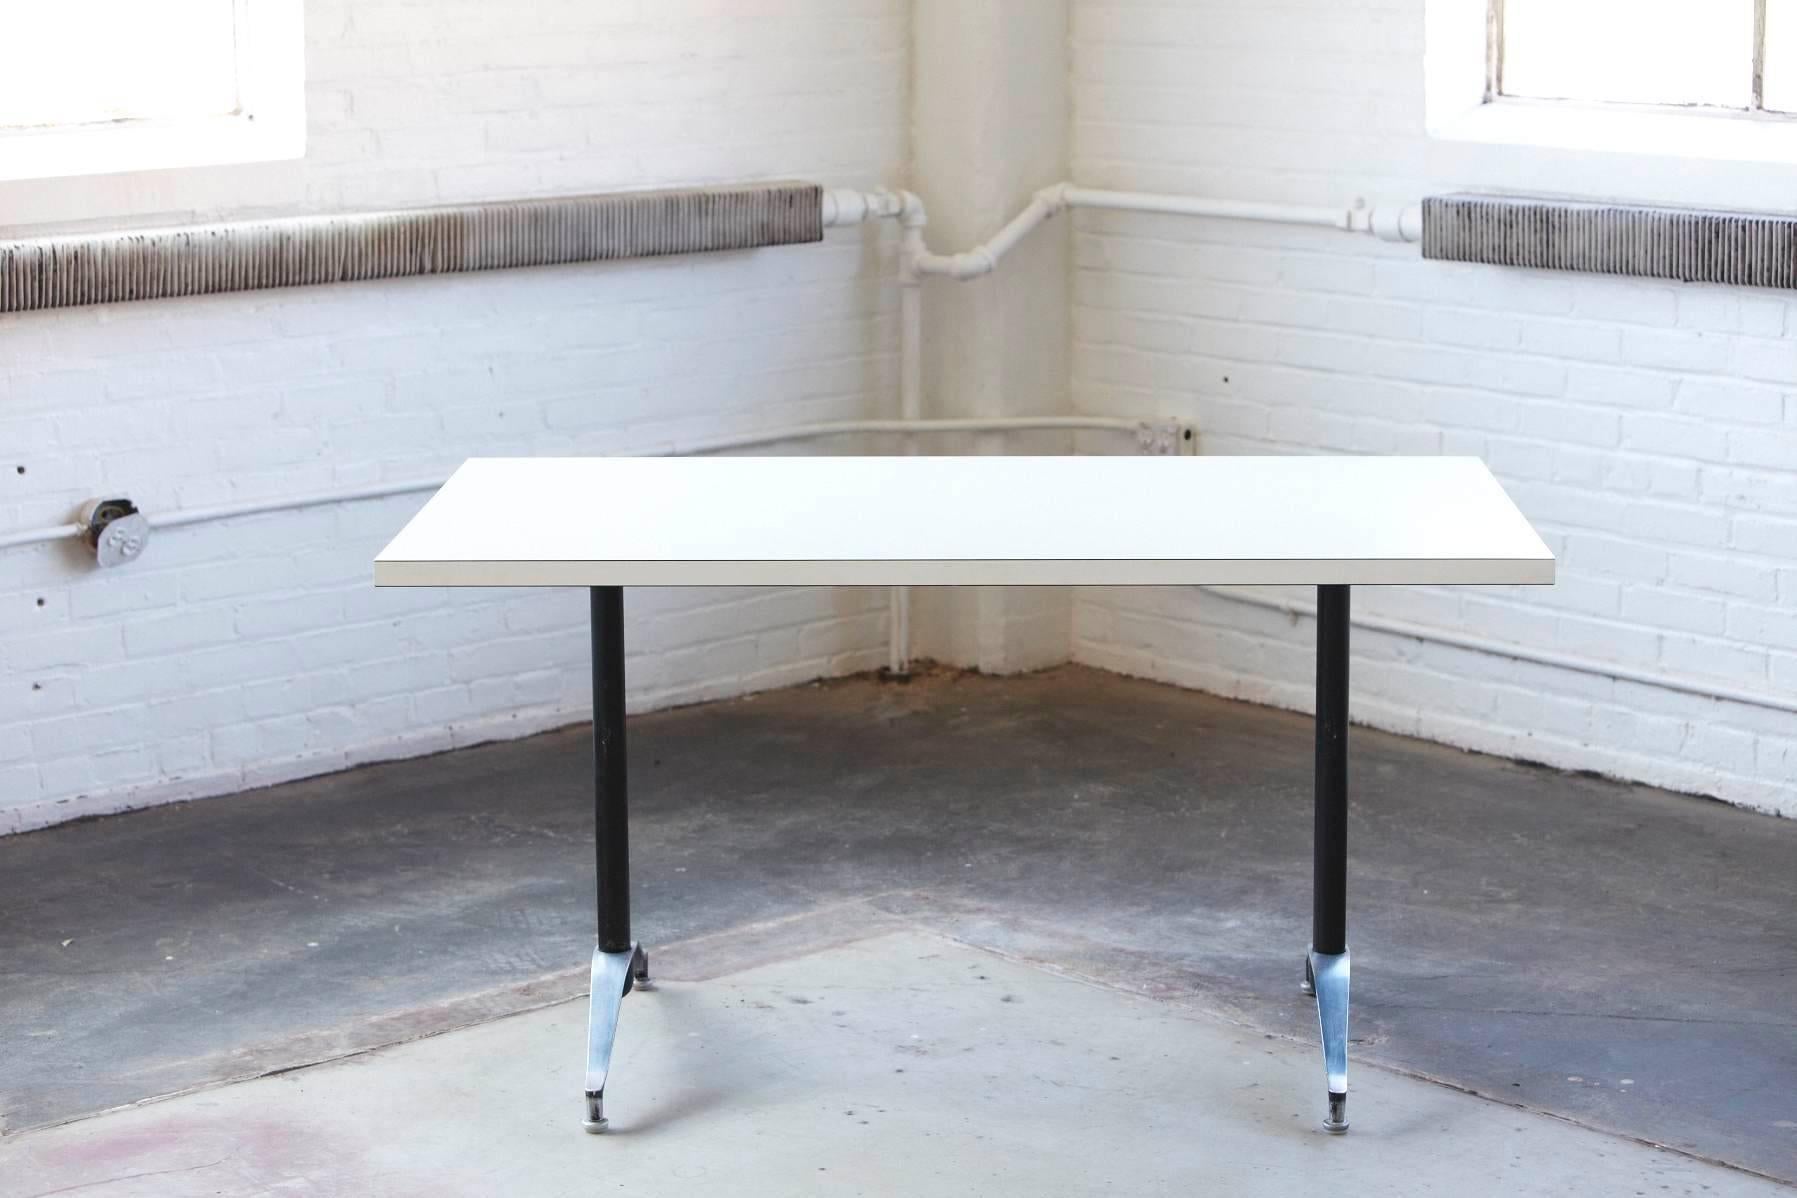 Minimalist dining or work table with white laminate top and black aluminum frame with polished aluminum legs. Great table for smaller spaces or studios in excellent condition, by Eames for Herman Miller.